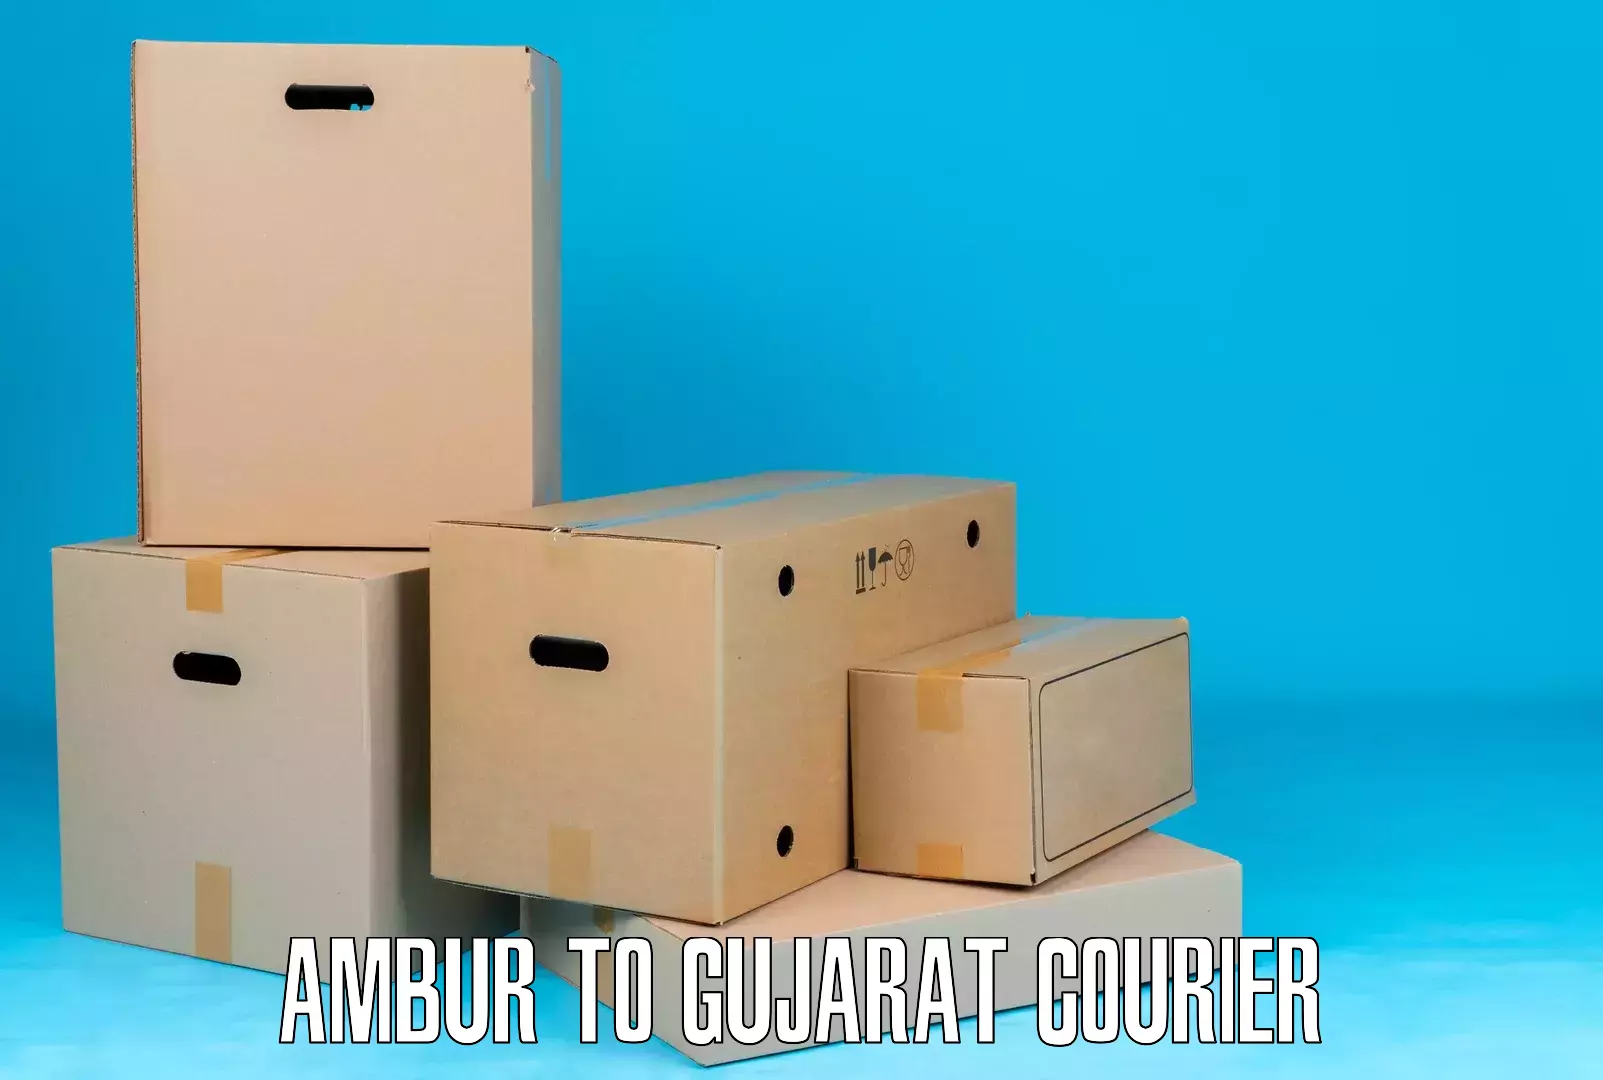 Quality courier services Ambur to Ahmedabad